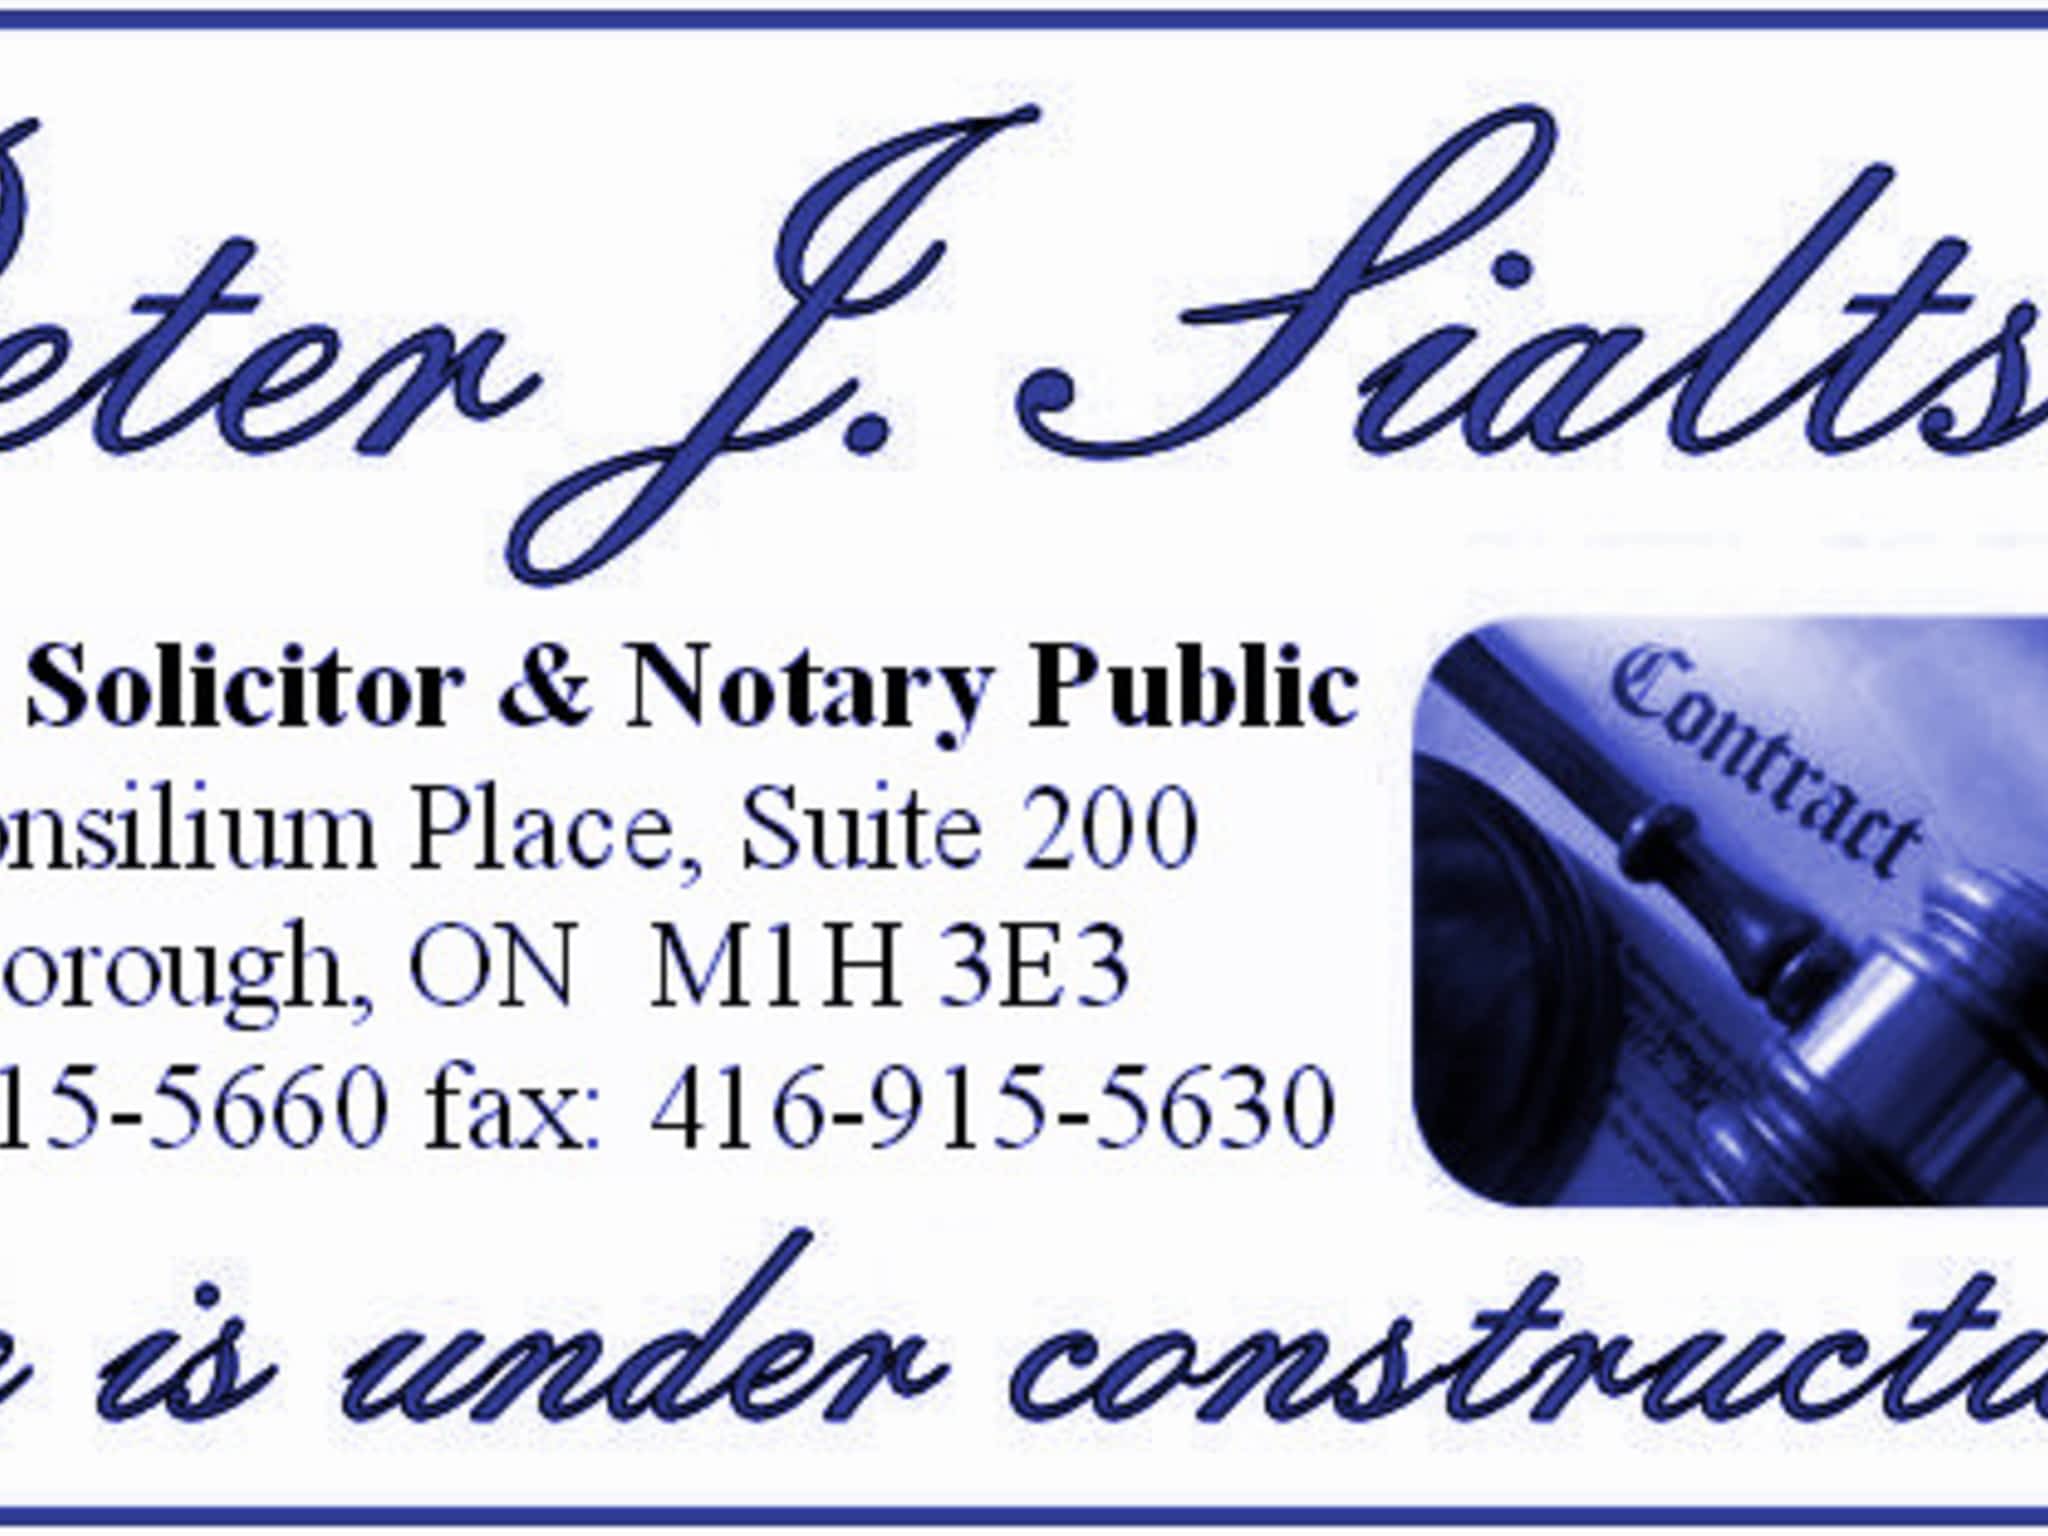 photo Peter J Sialtsis Barrister Solicitor & Notary Public